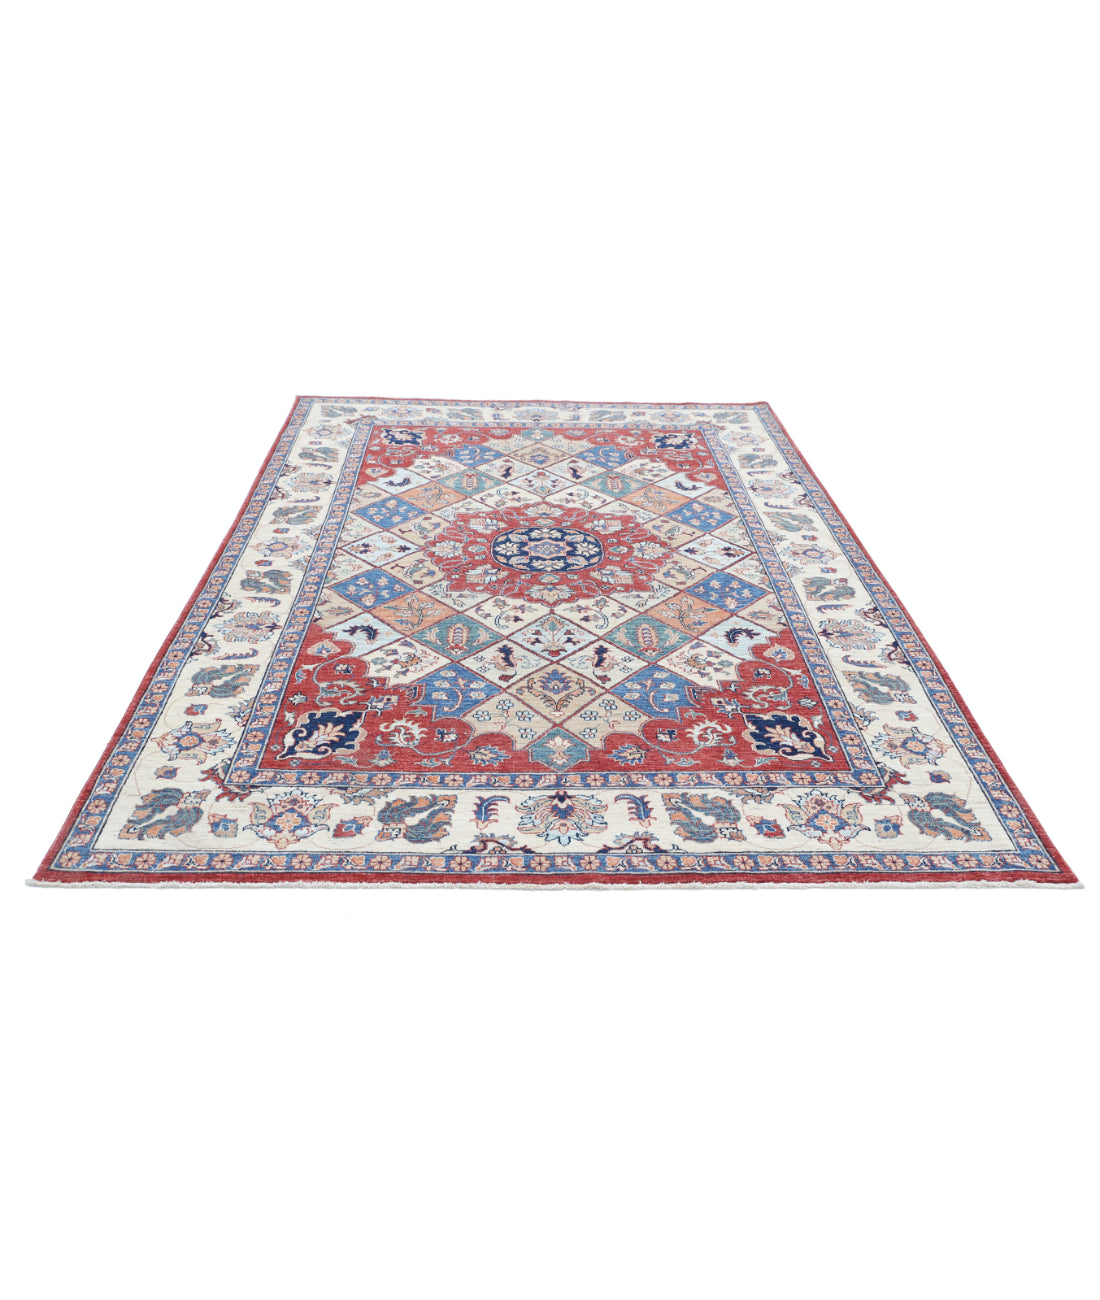 Hand Knotted Ziegler Farhan Wool Rug - 6'7'' x 9'3'' 6'7'' x 9'3'' (198 X 278) / Red / Ivory